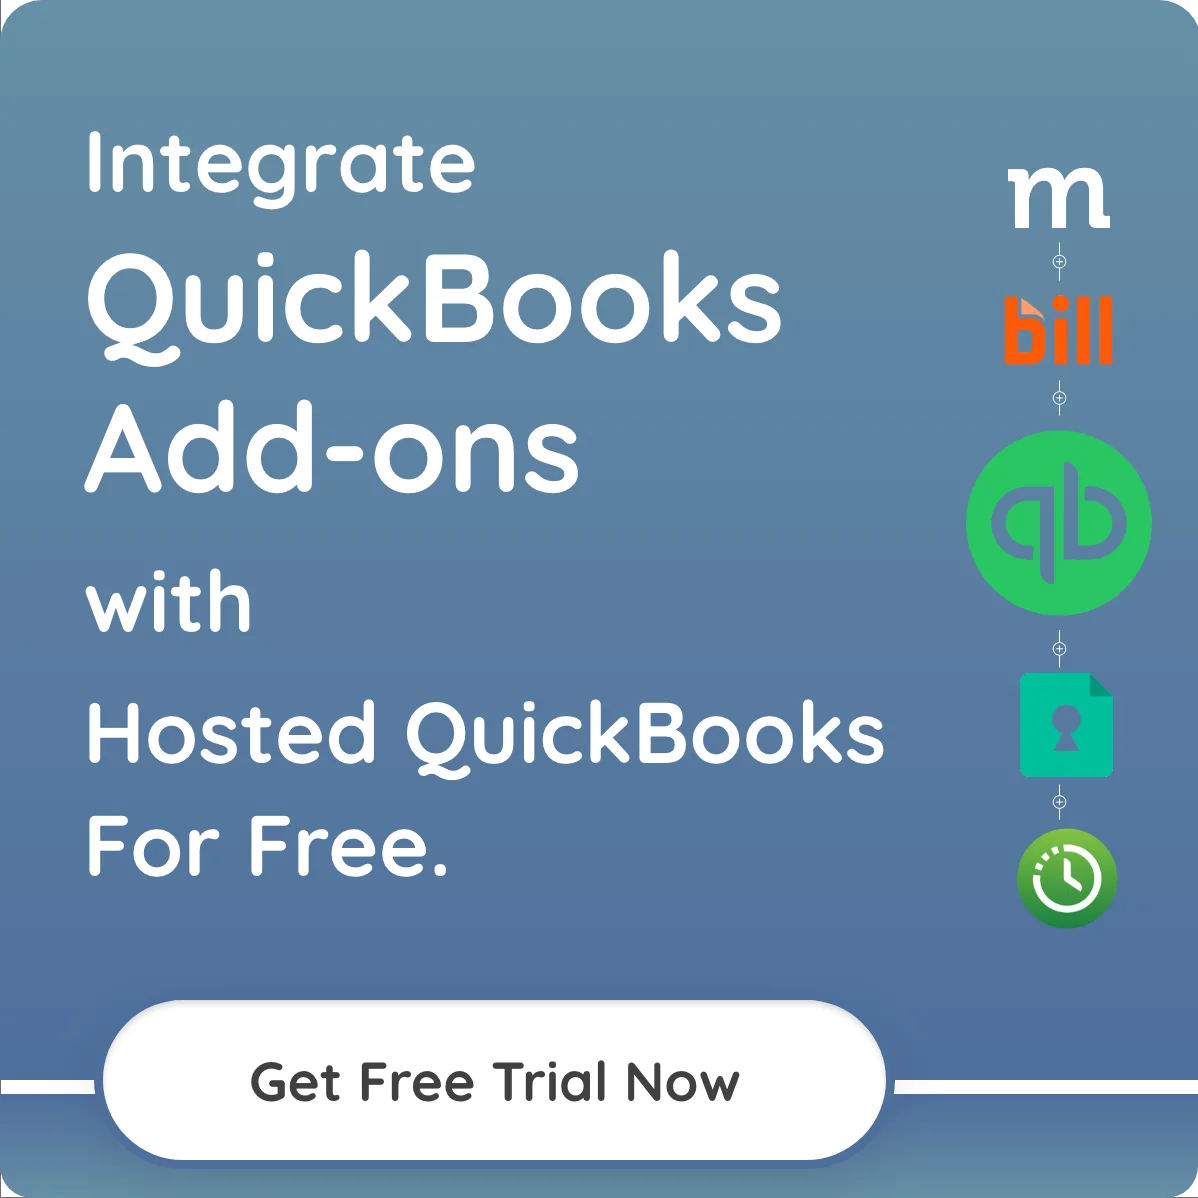 Integrate QuickBooks Add-ons with Hosted QuickBooks